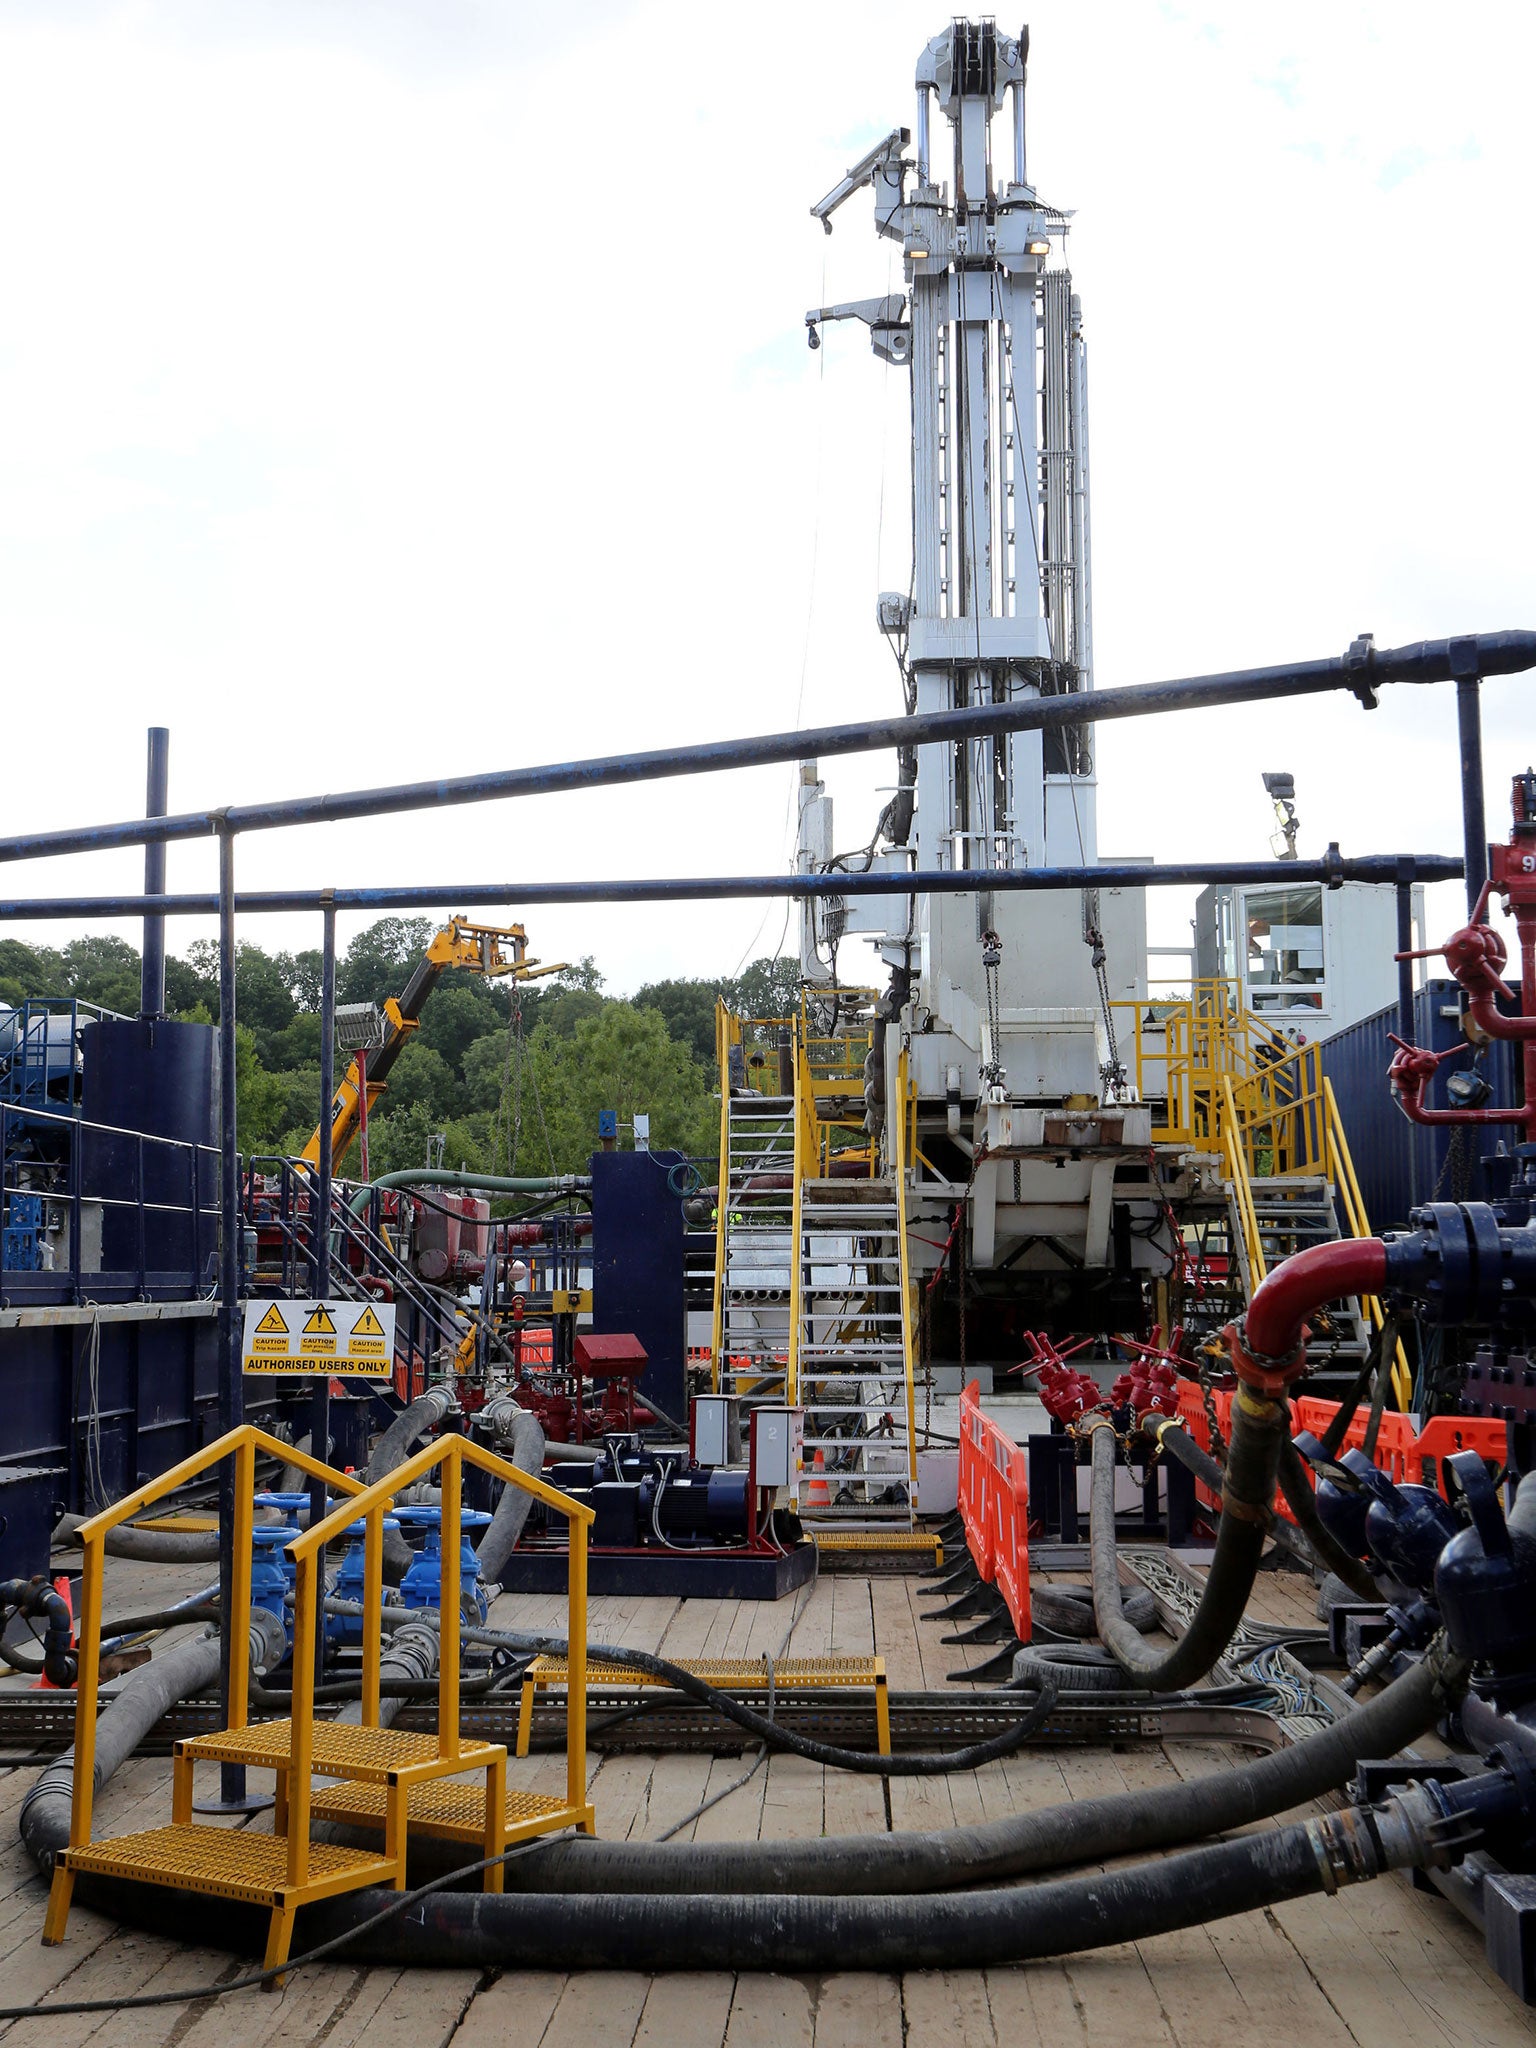 The Cuadrilla exploration drilling site in Balcombe, West Sussex. The latest bidding process for shale companies seeking licences to explore for oil and gas has opened